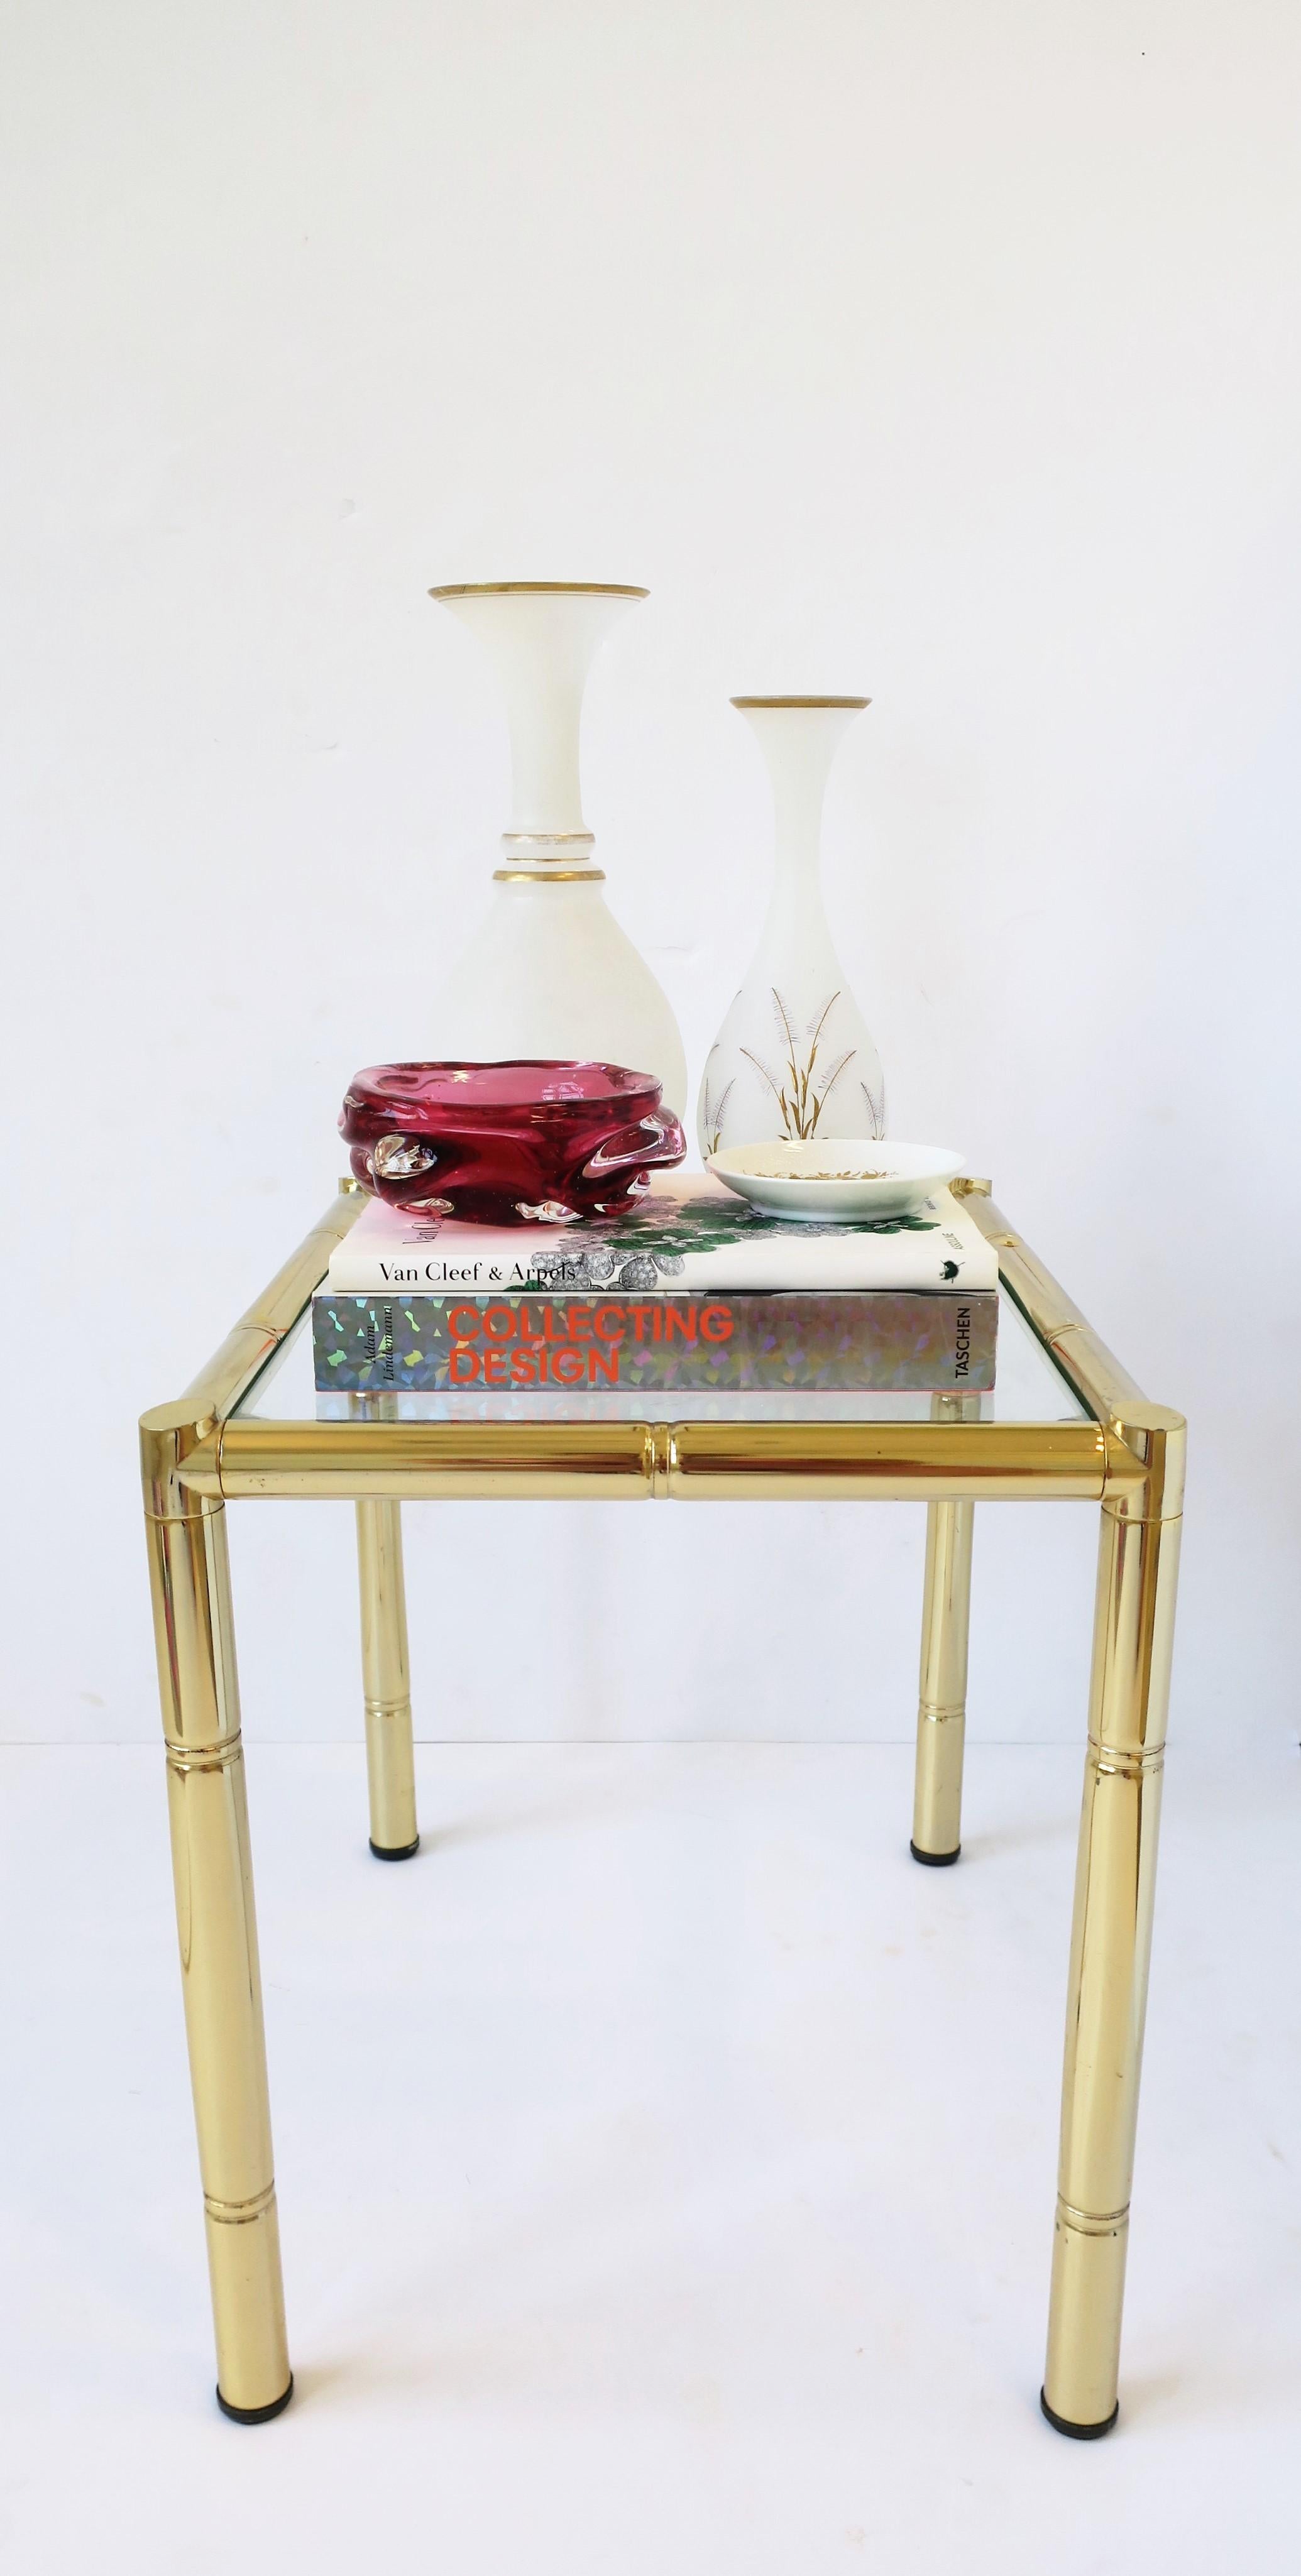 Brass and Glass Bamboo-Esque Side or End Table, Small, 1970s For Sale 1